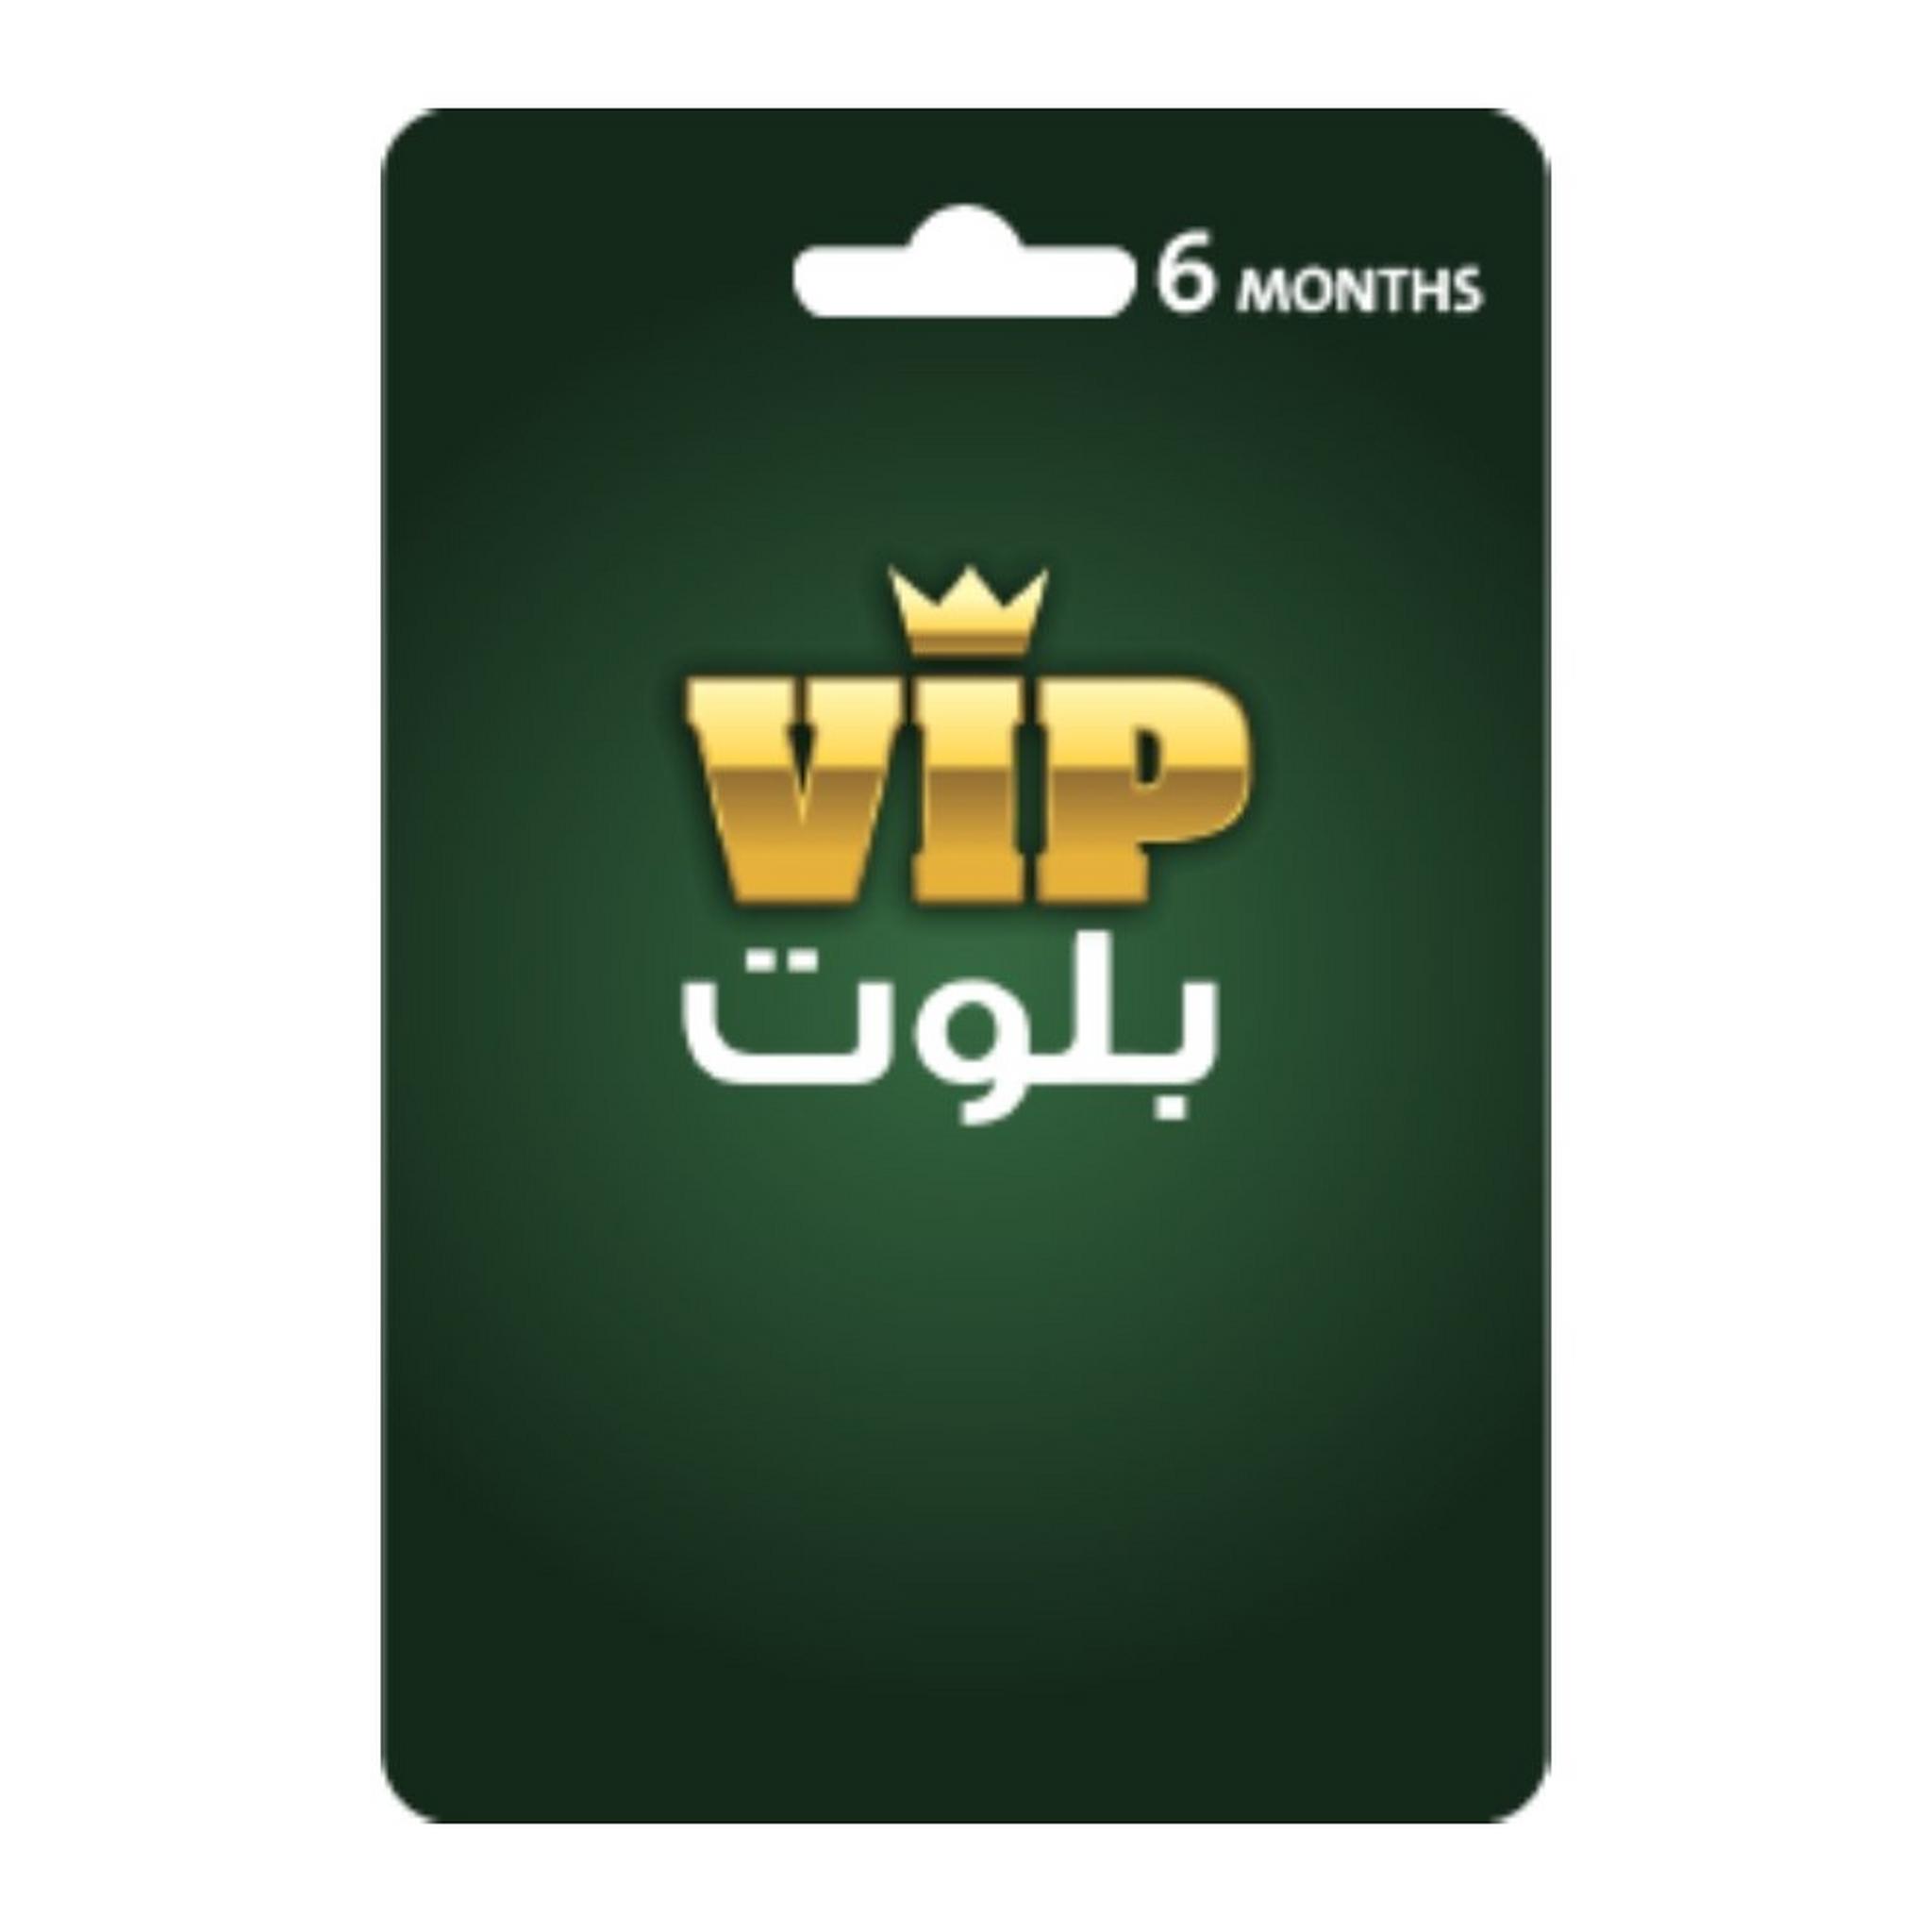 VIP Baloot Card For 6 Months